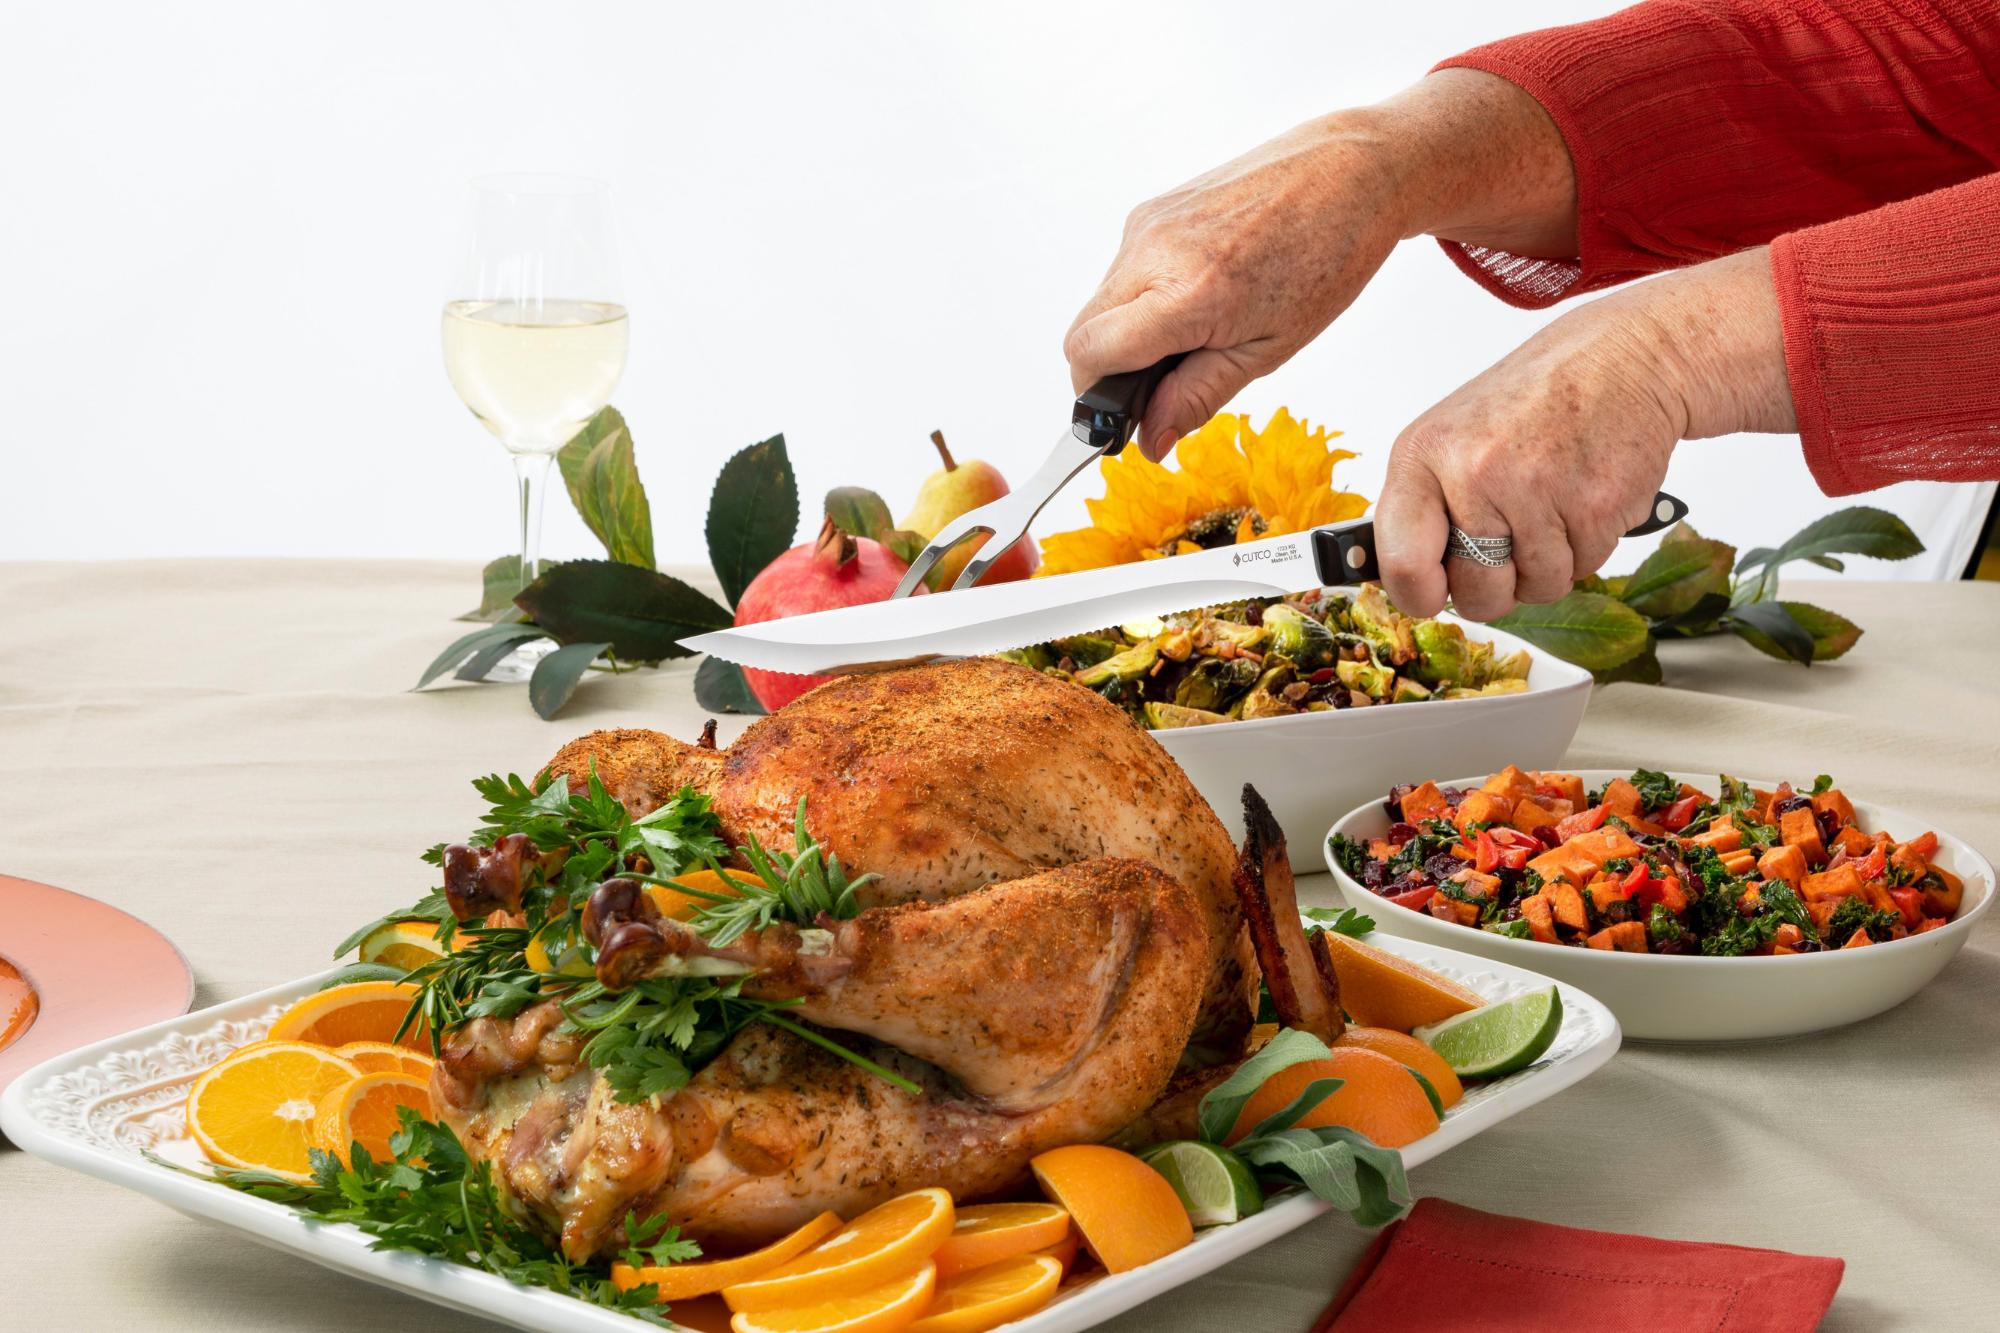 8 Must-Have Kitchen Knives and Utensils for Thanksgiving - From Cutco -  Knives Illustrated